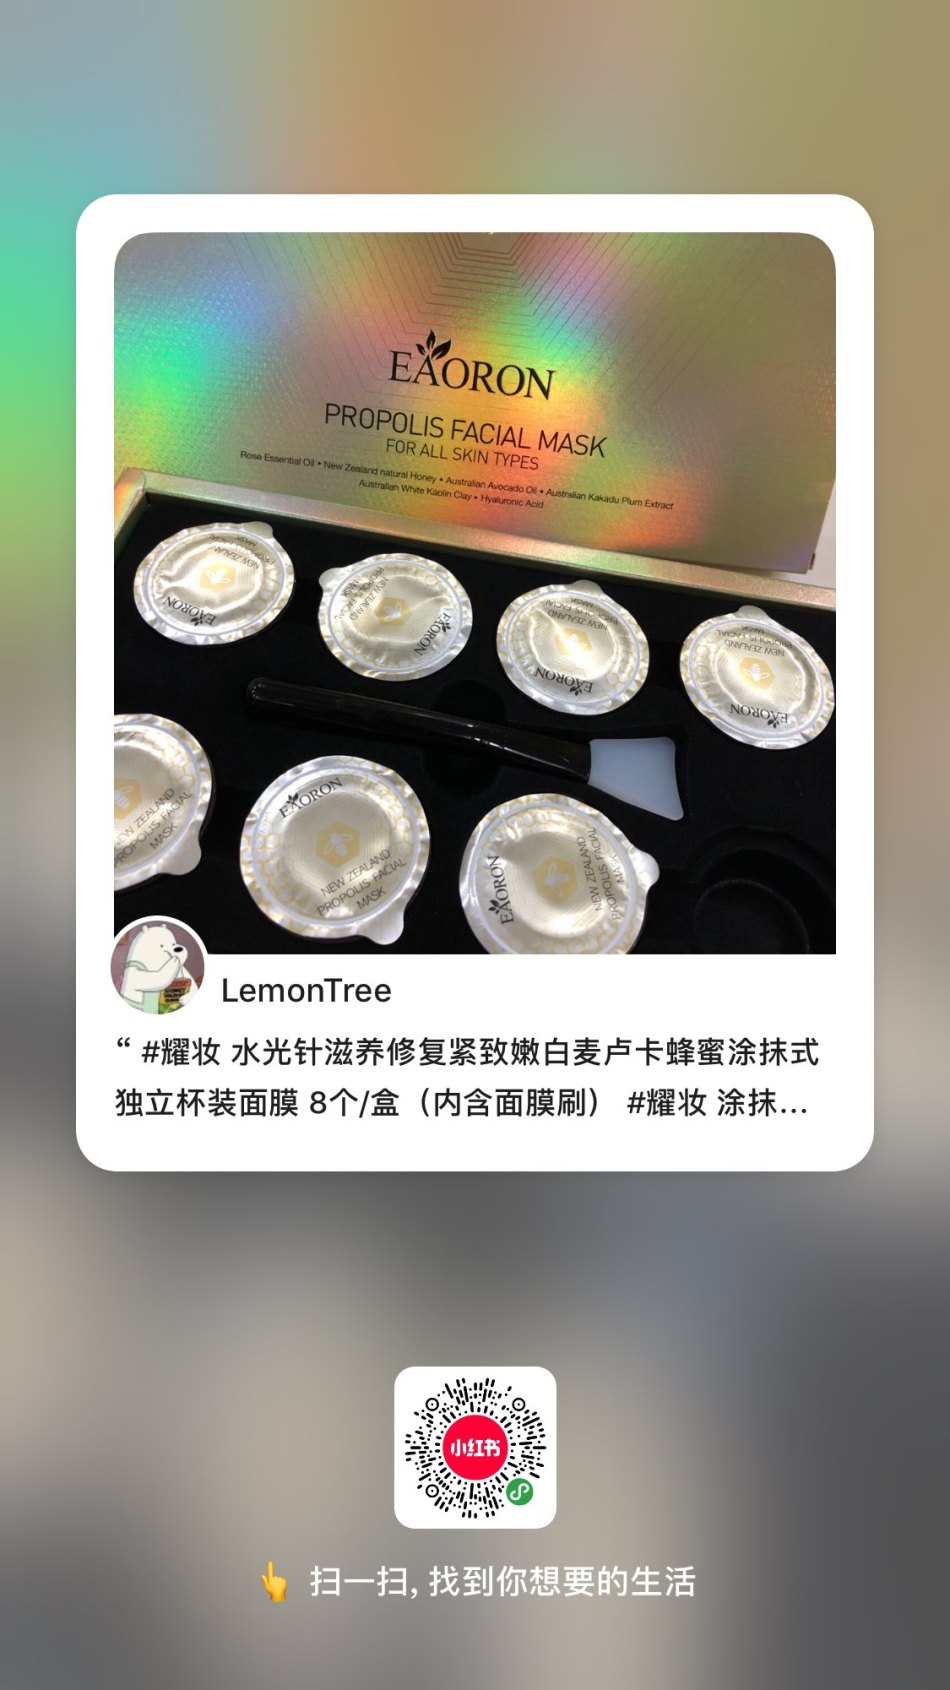 https://img1.superbuy.com/images/consult/2020/04/04/2bf55261e8c7ee33805047274cd7373f.jpg?x-oss-process=image/resize,w_950